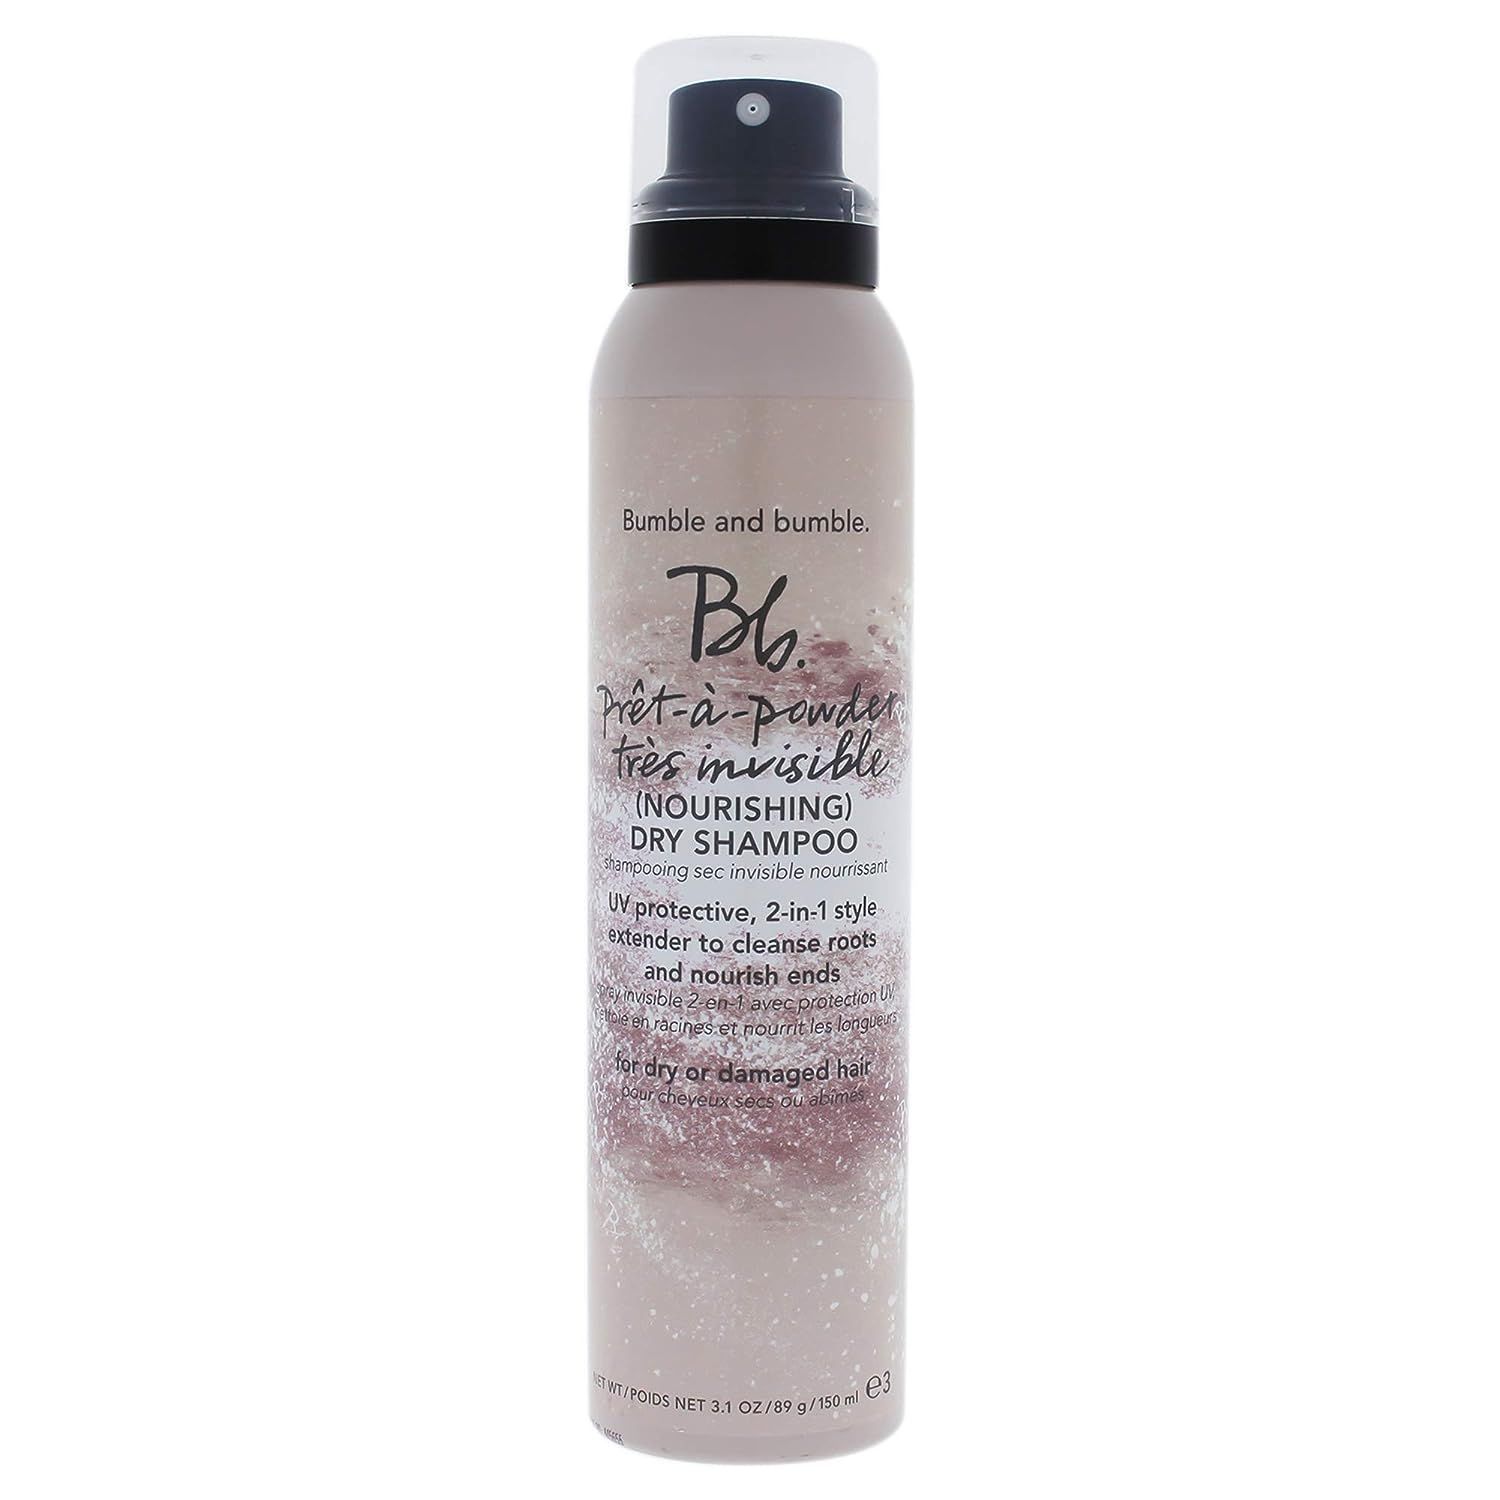 Bumble and Bumble Pret-a-Powder Tres Invisible Nourishing Dry Shampoo, 3.1 Ounce | Amazon (US)